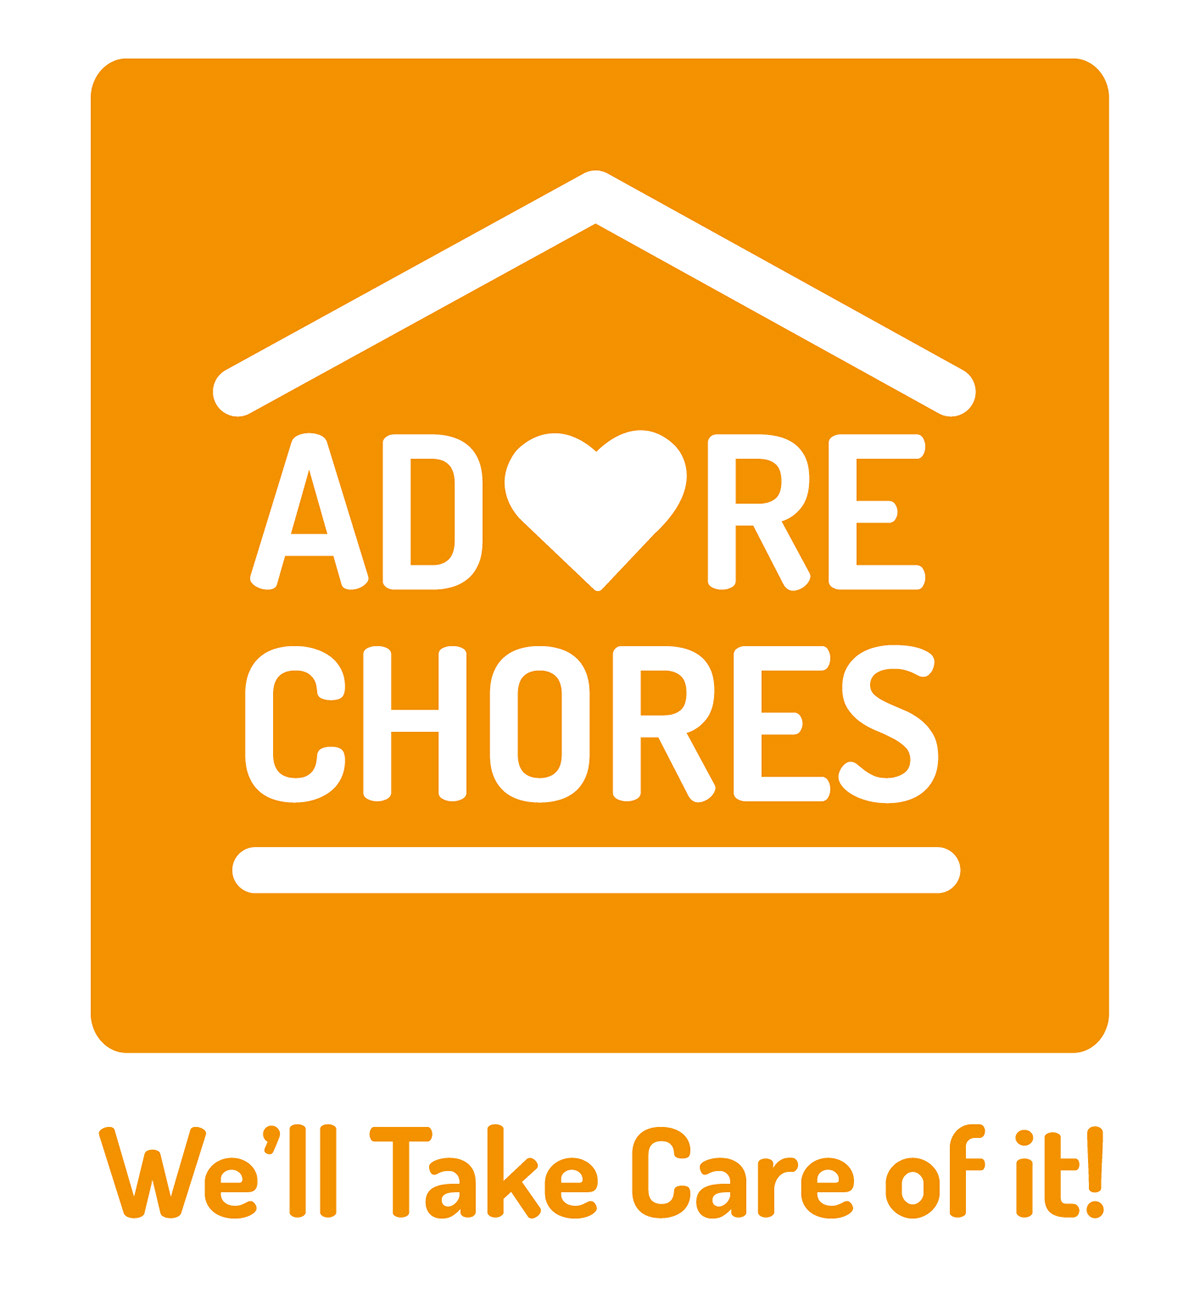 Adore Chores cleaning gardening services tradesmen Heart Shape orange White home house cosy warm